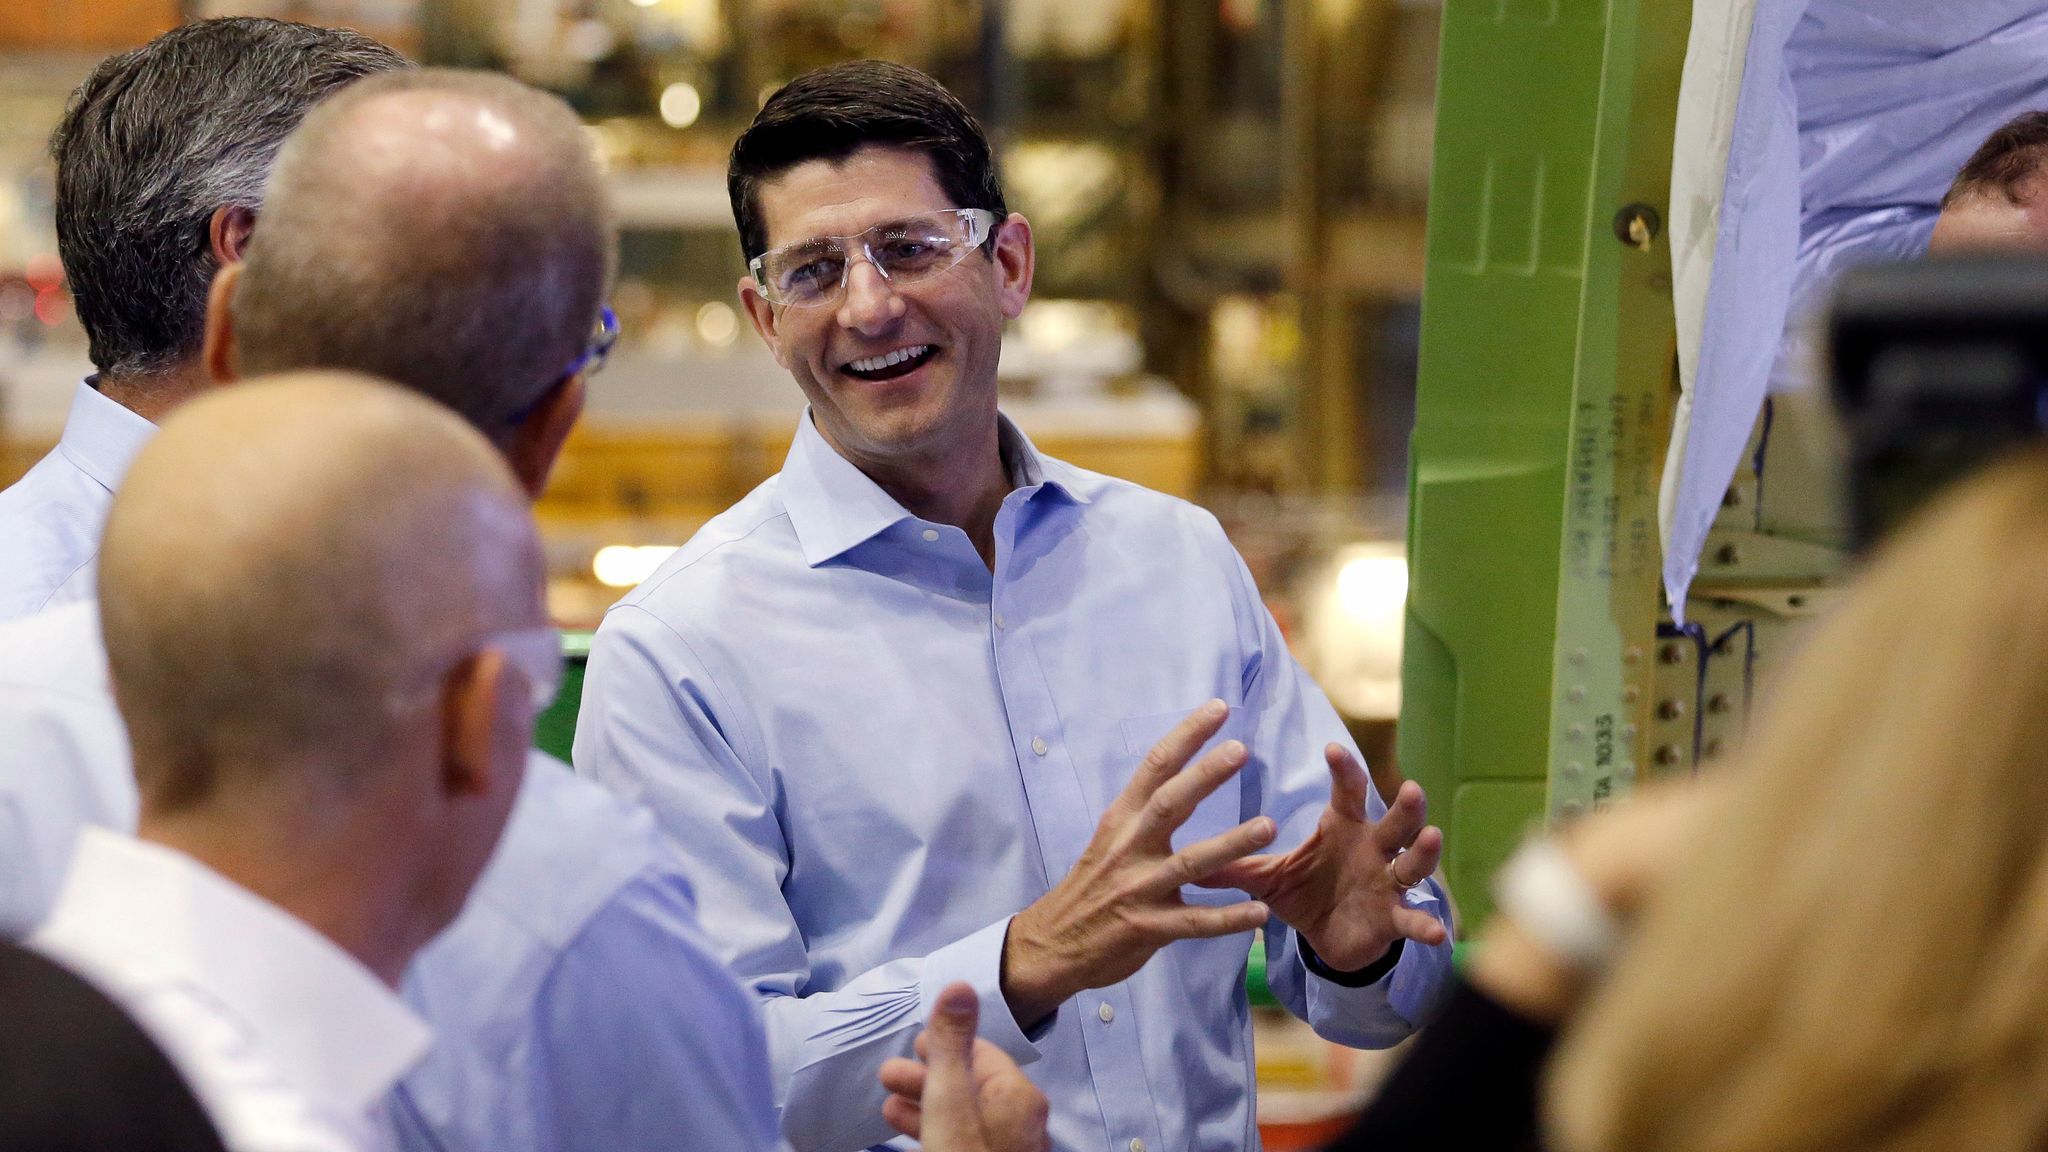 House Speaker Paul D. Ryan (R-Wis.) talks with Boeing Co. employees while on a tour of the airplane factory in Everett, Wash., in August.